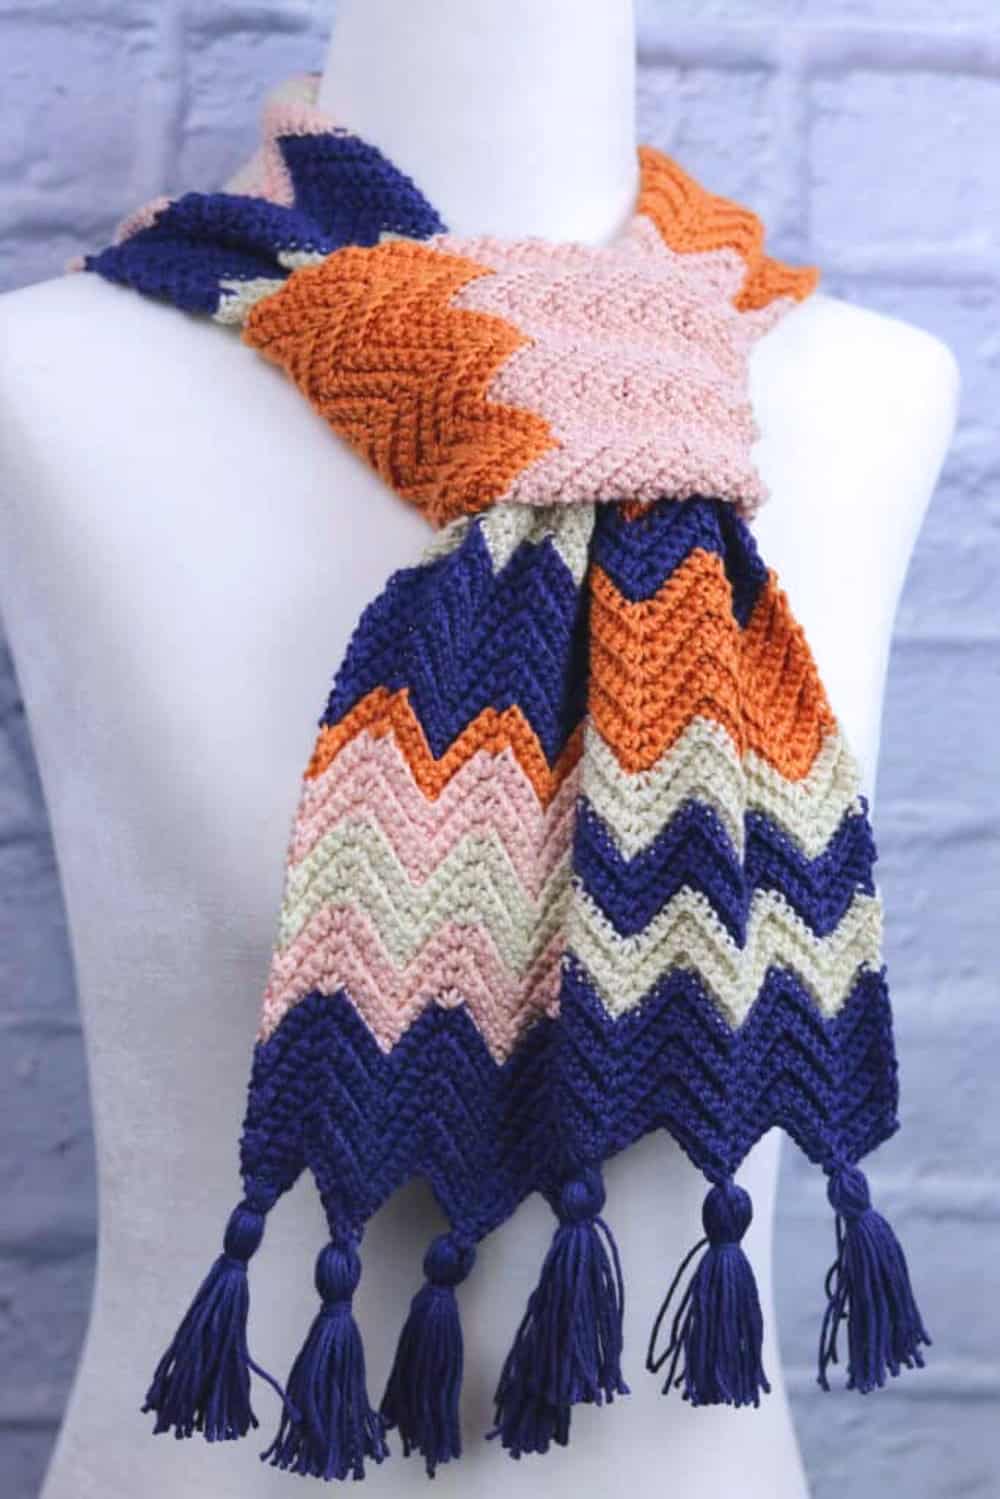 Colorful crocheted scarf made in a zig-zag pattern.